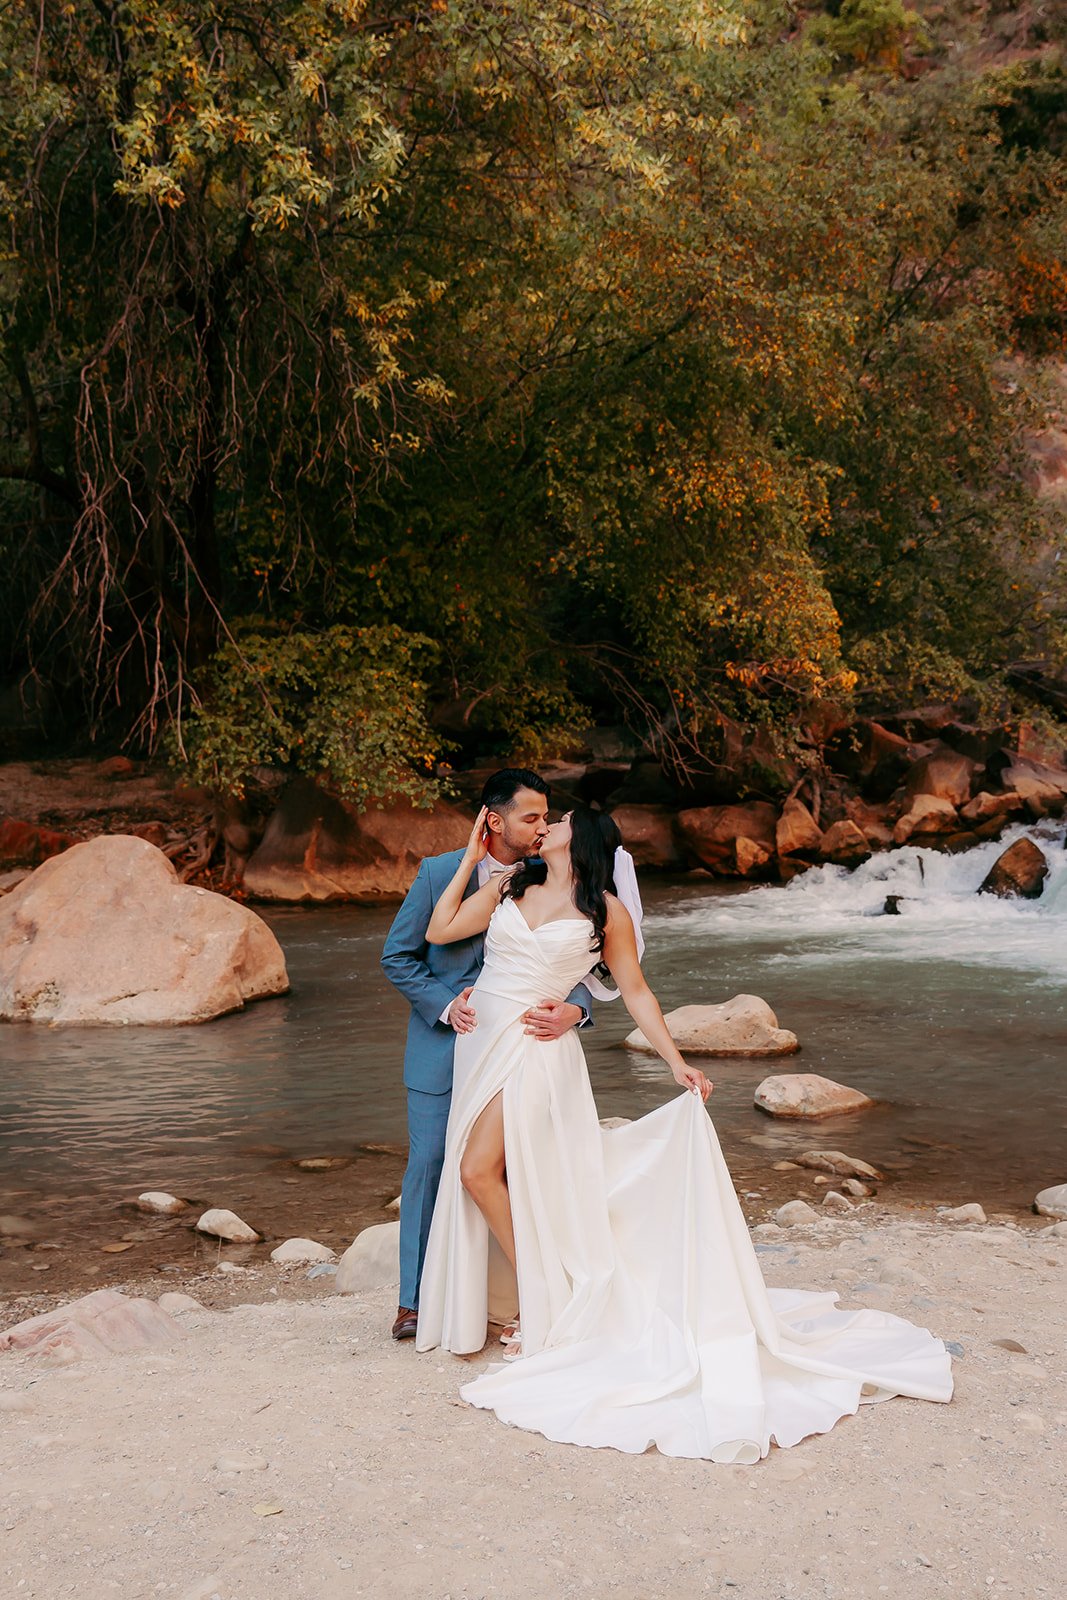  Fall elopement day at Zion National Park 